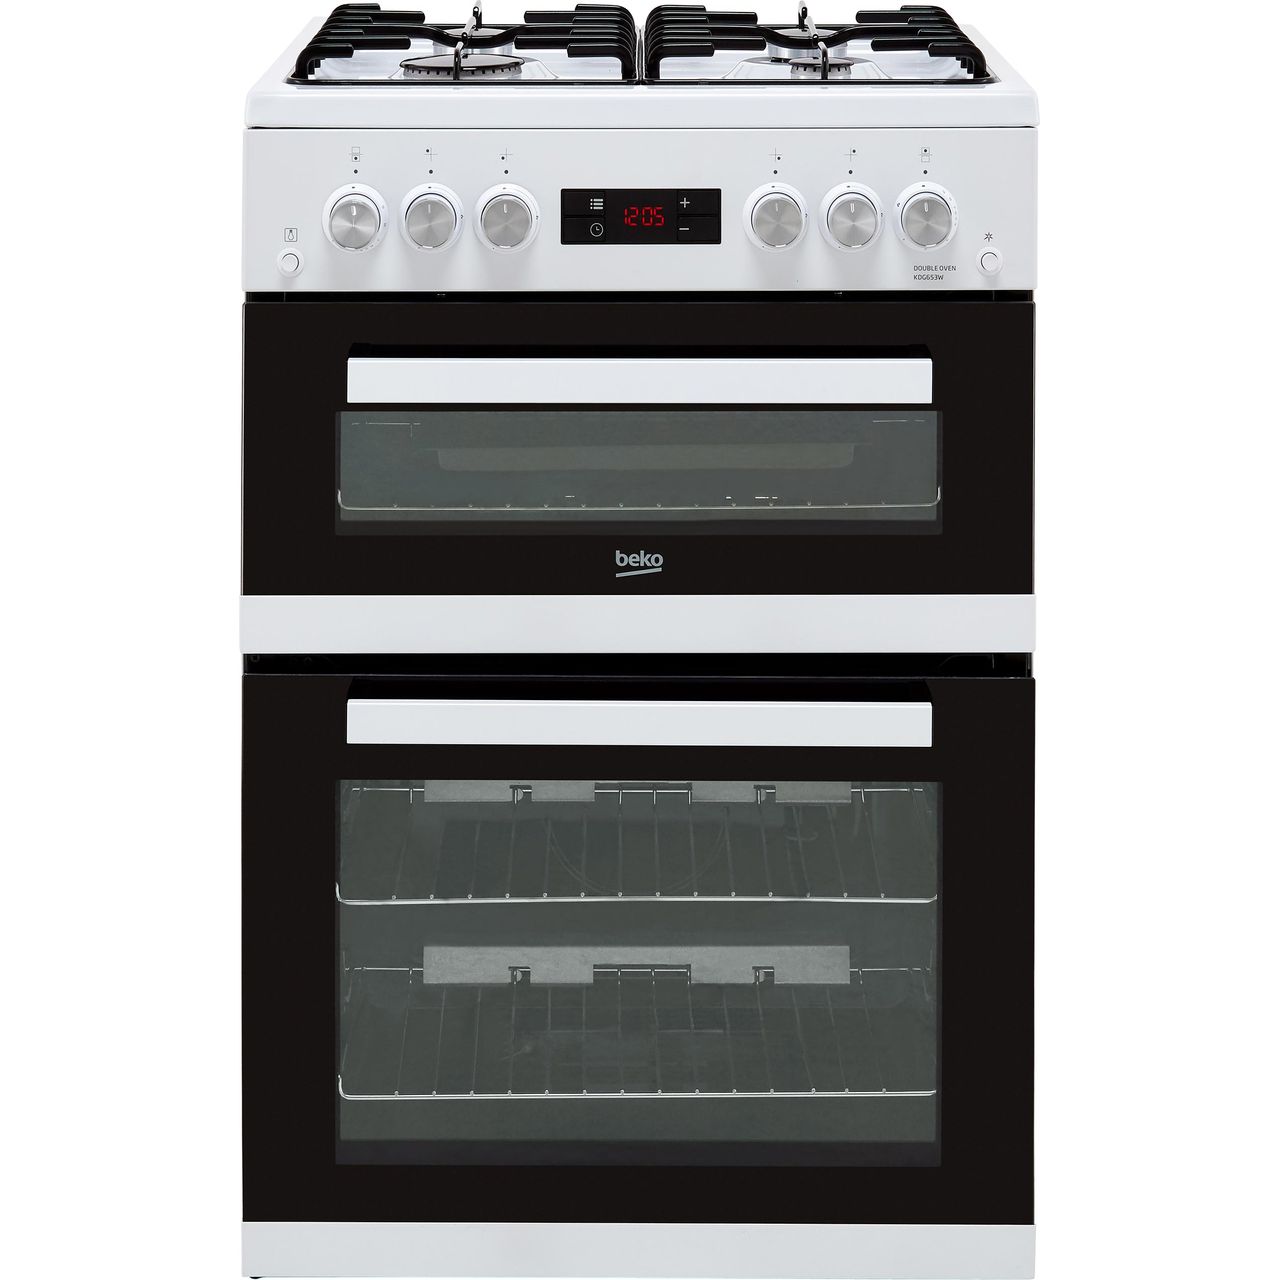 Beko KDG653W 60cm Gas Cooker with Full Width Gas Grill Review